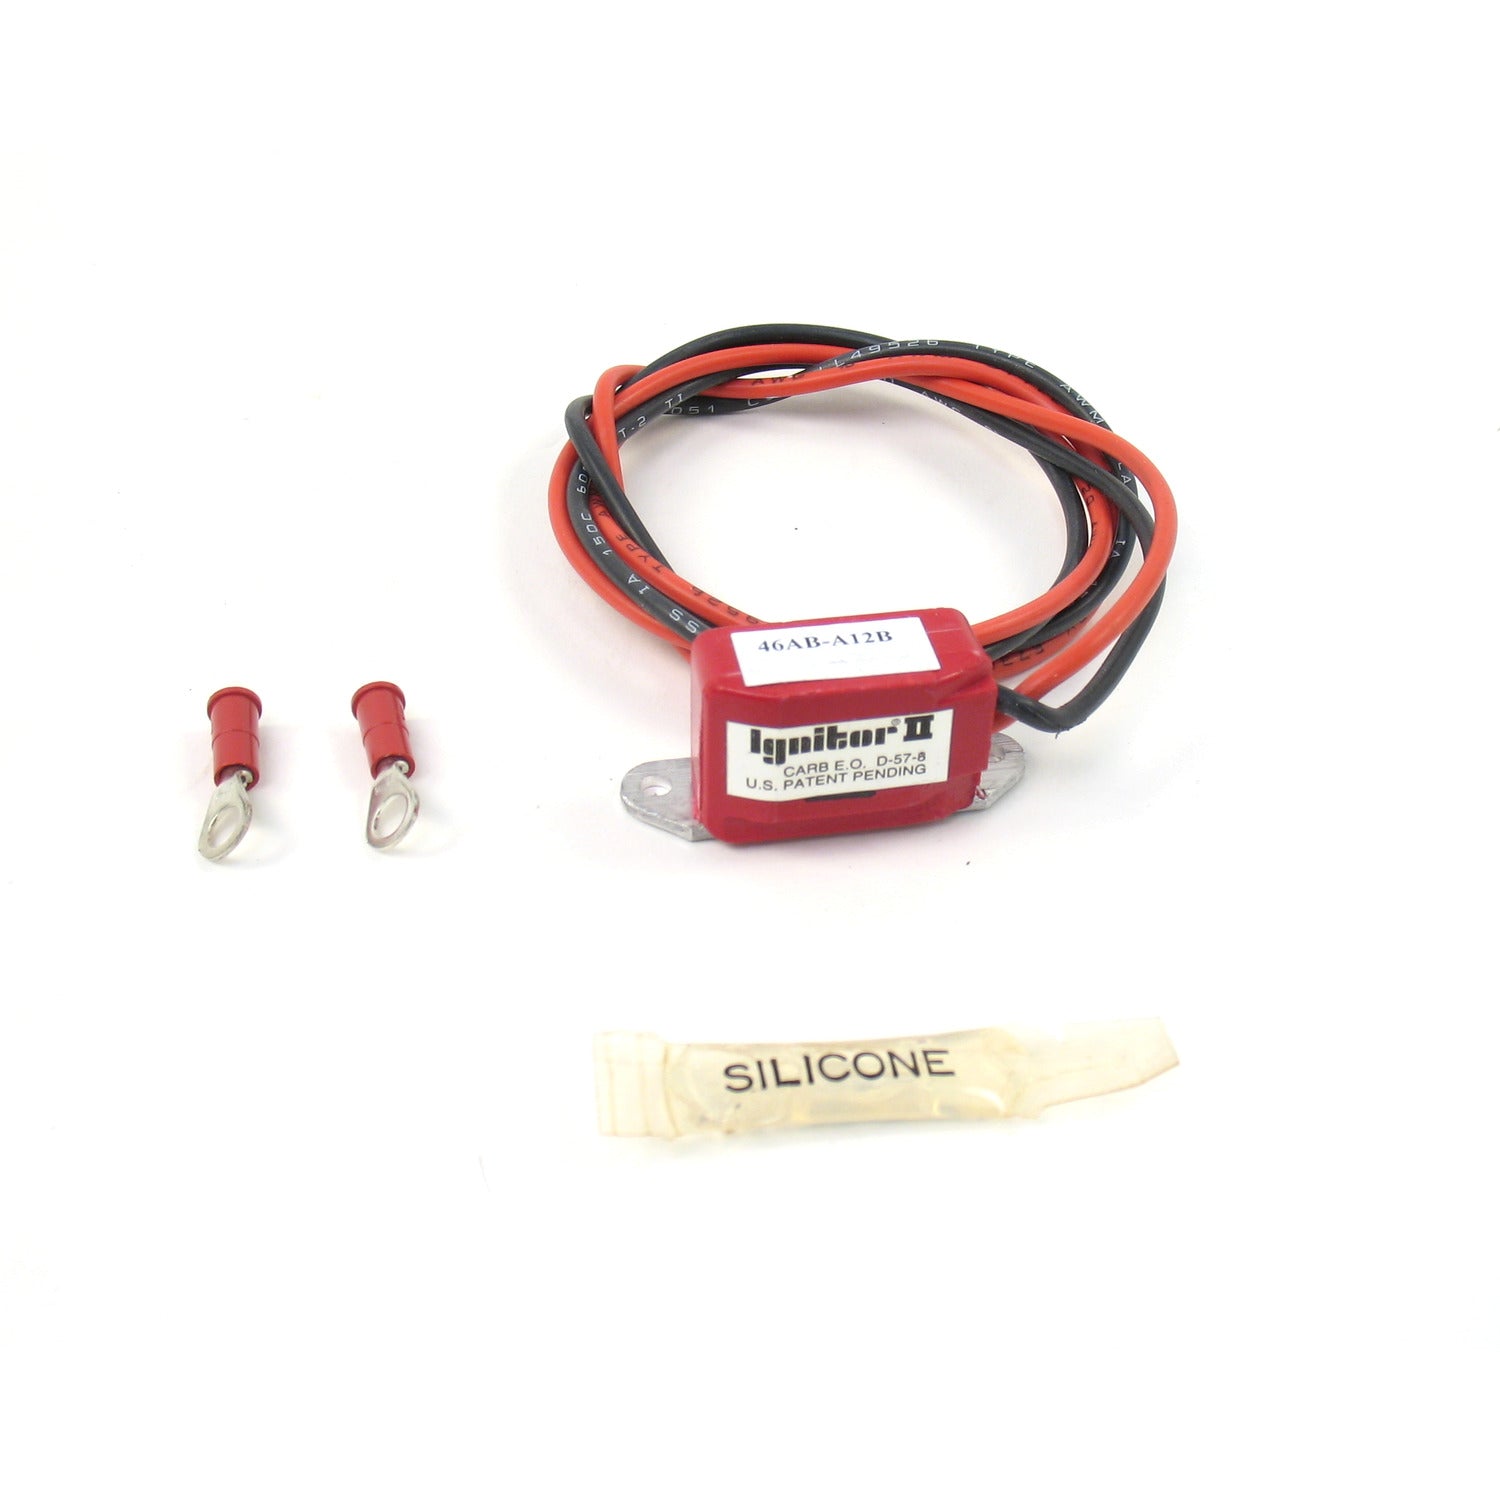 PerTronix D500700 Module (replacement) Ignitor II Flame-Thrower Billet Distributor